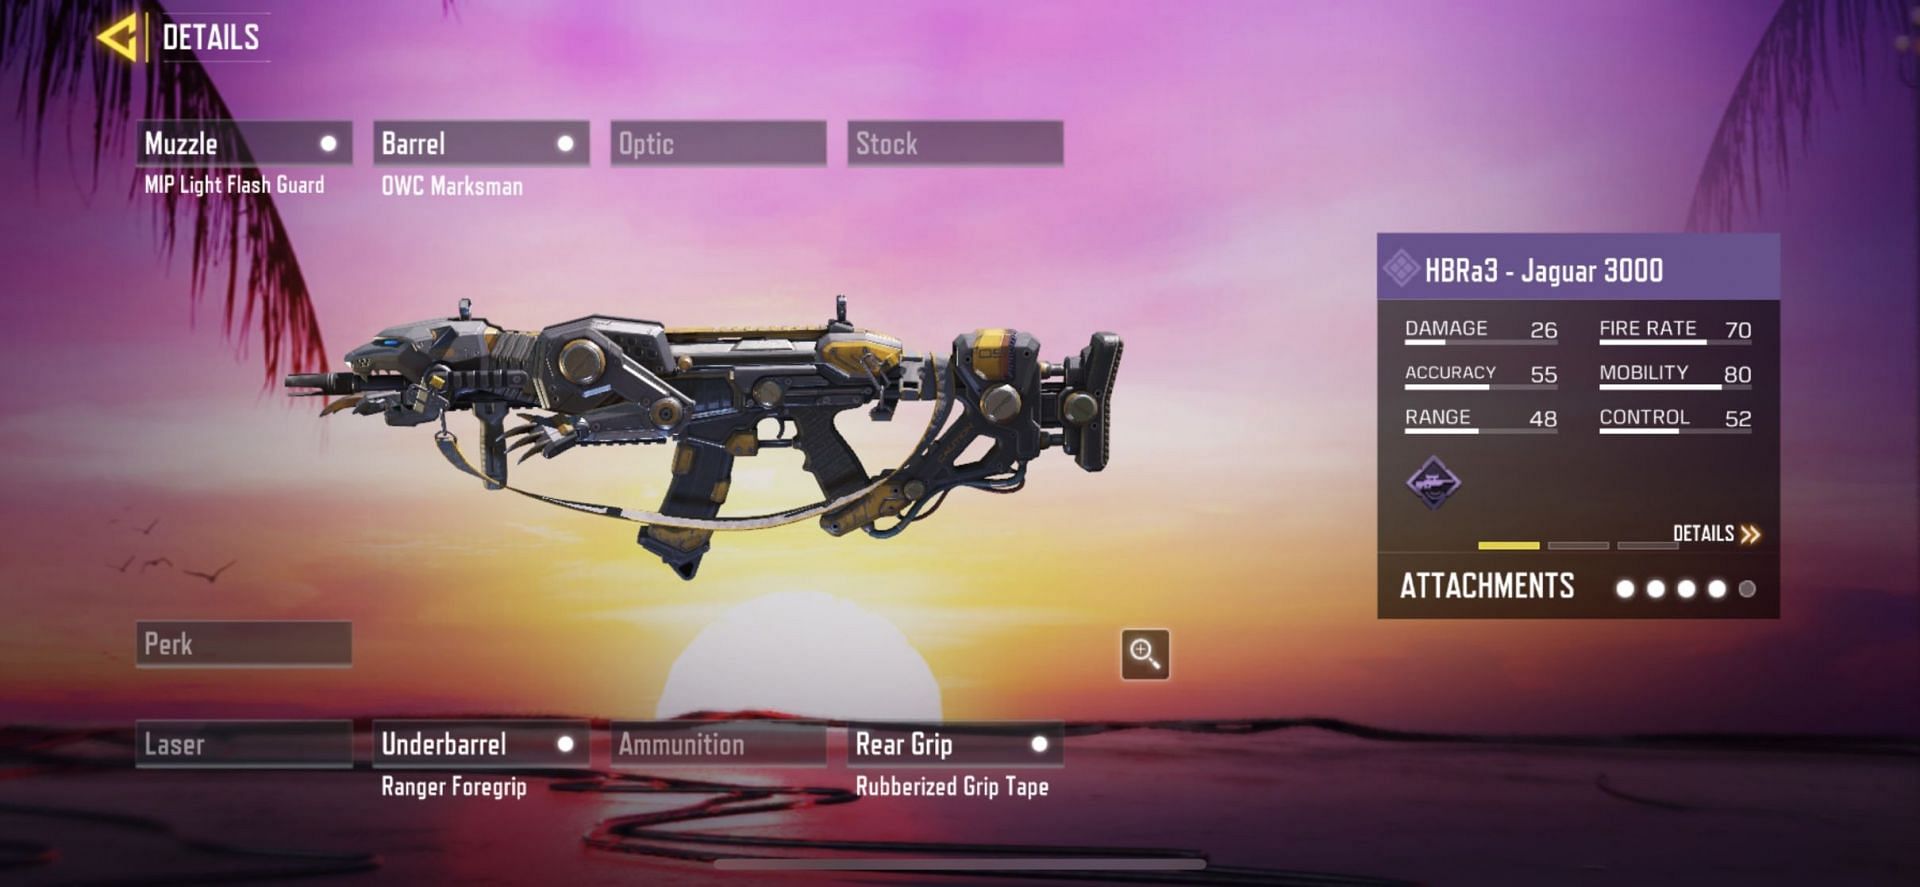 This weapon skin for the HBRa3 in Call of Duty: Mobile creates a robot jaguar that looks great and is a worthy investment from the battle pass (Image via Activision)